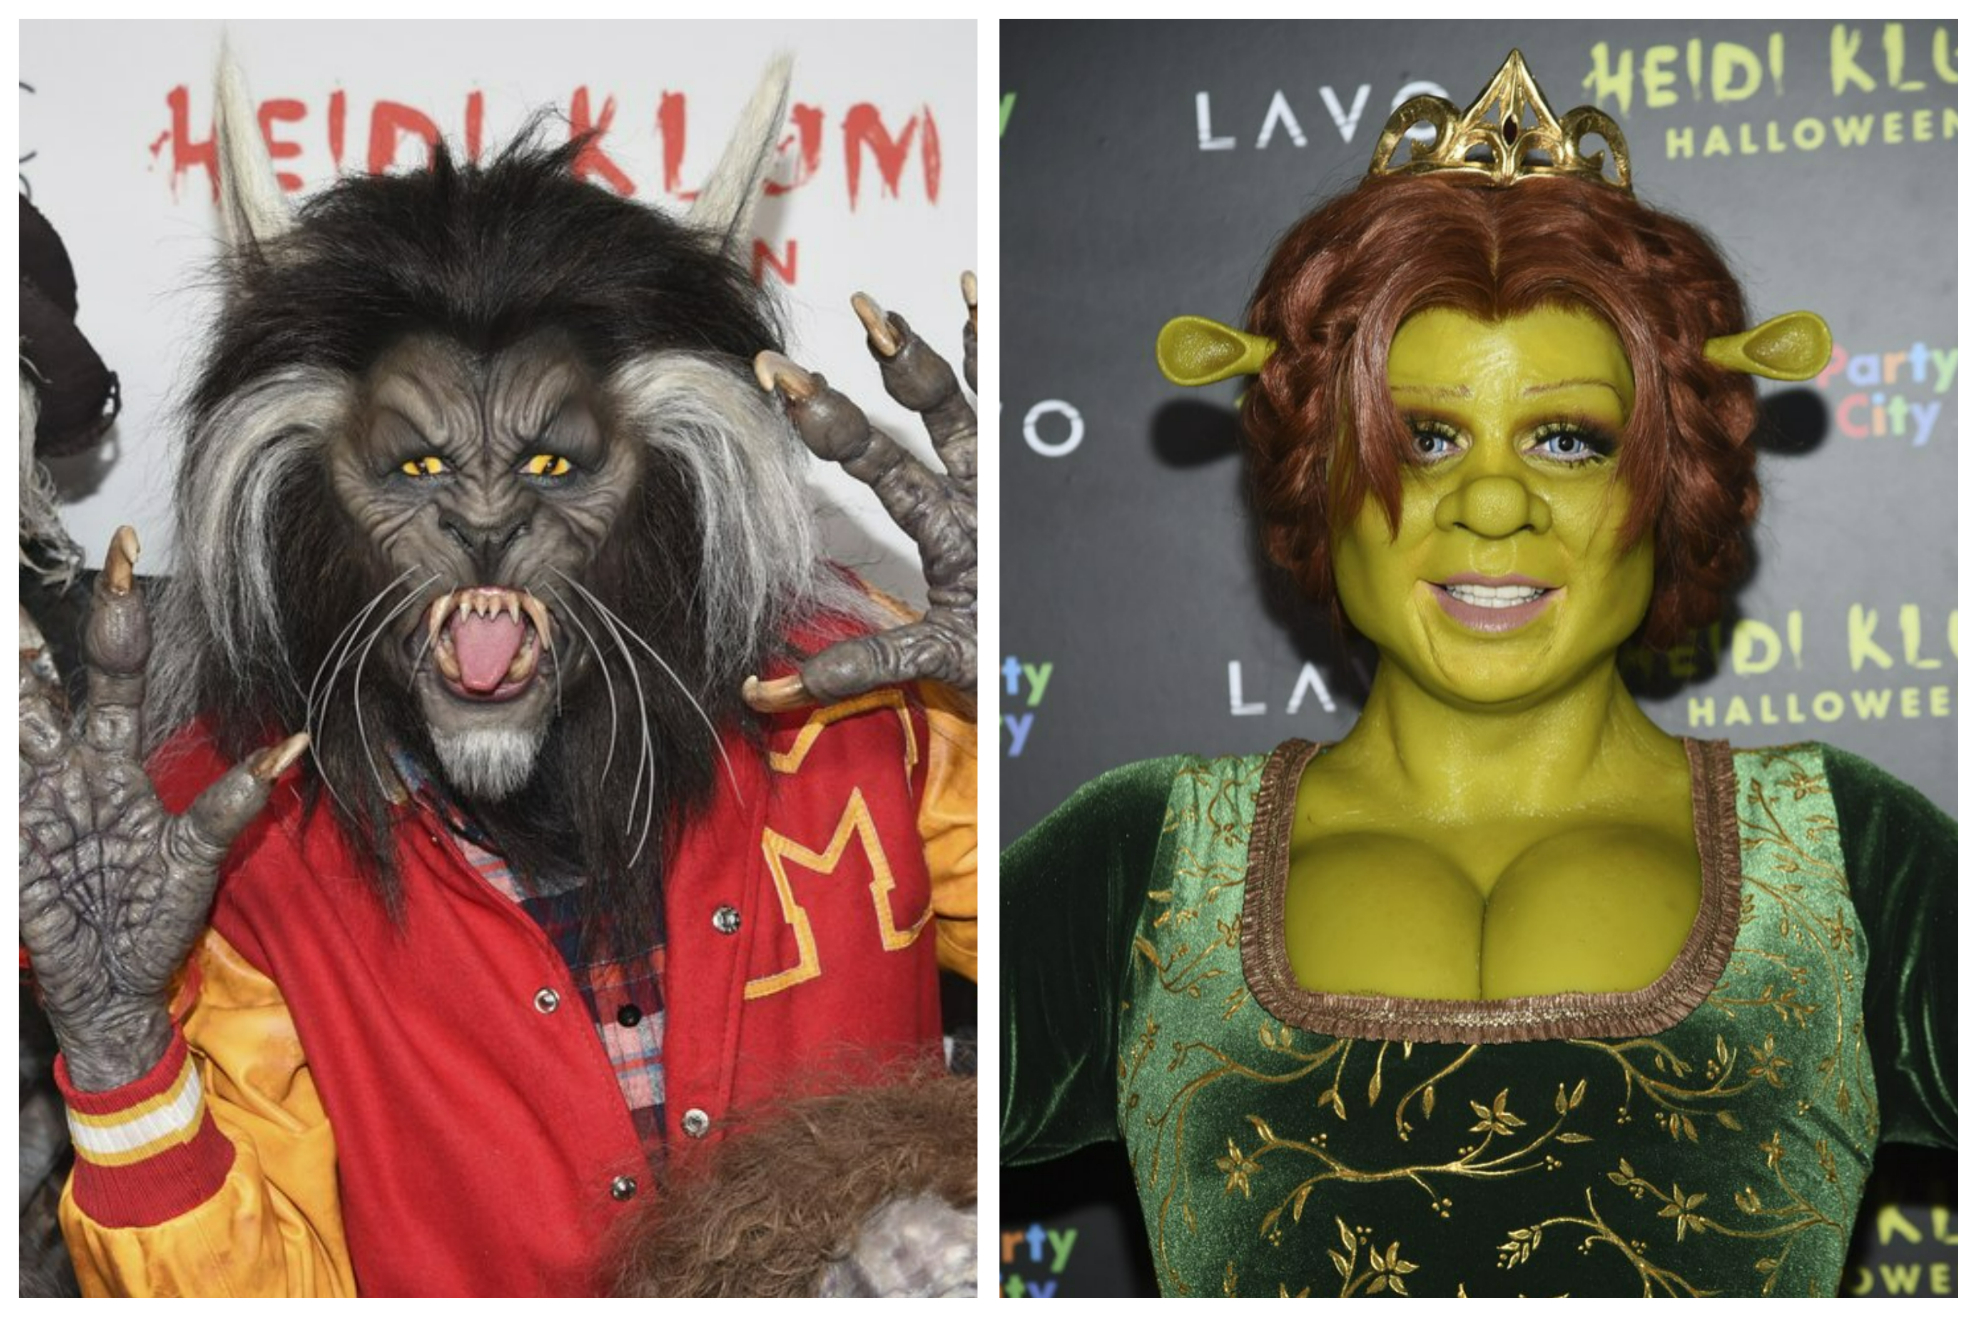 Heidi Klum Halloween: The most spectacular costumes of the former model